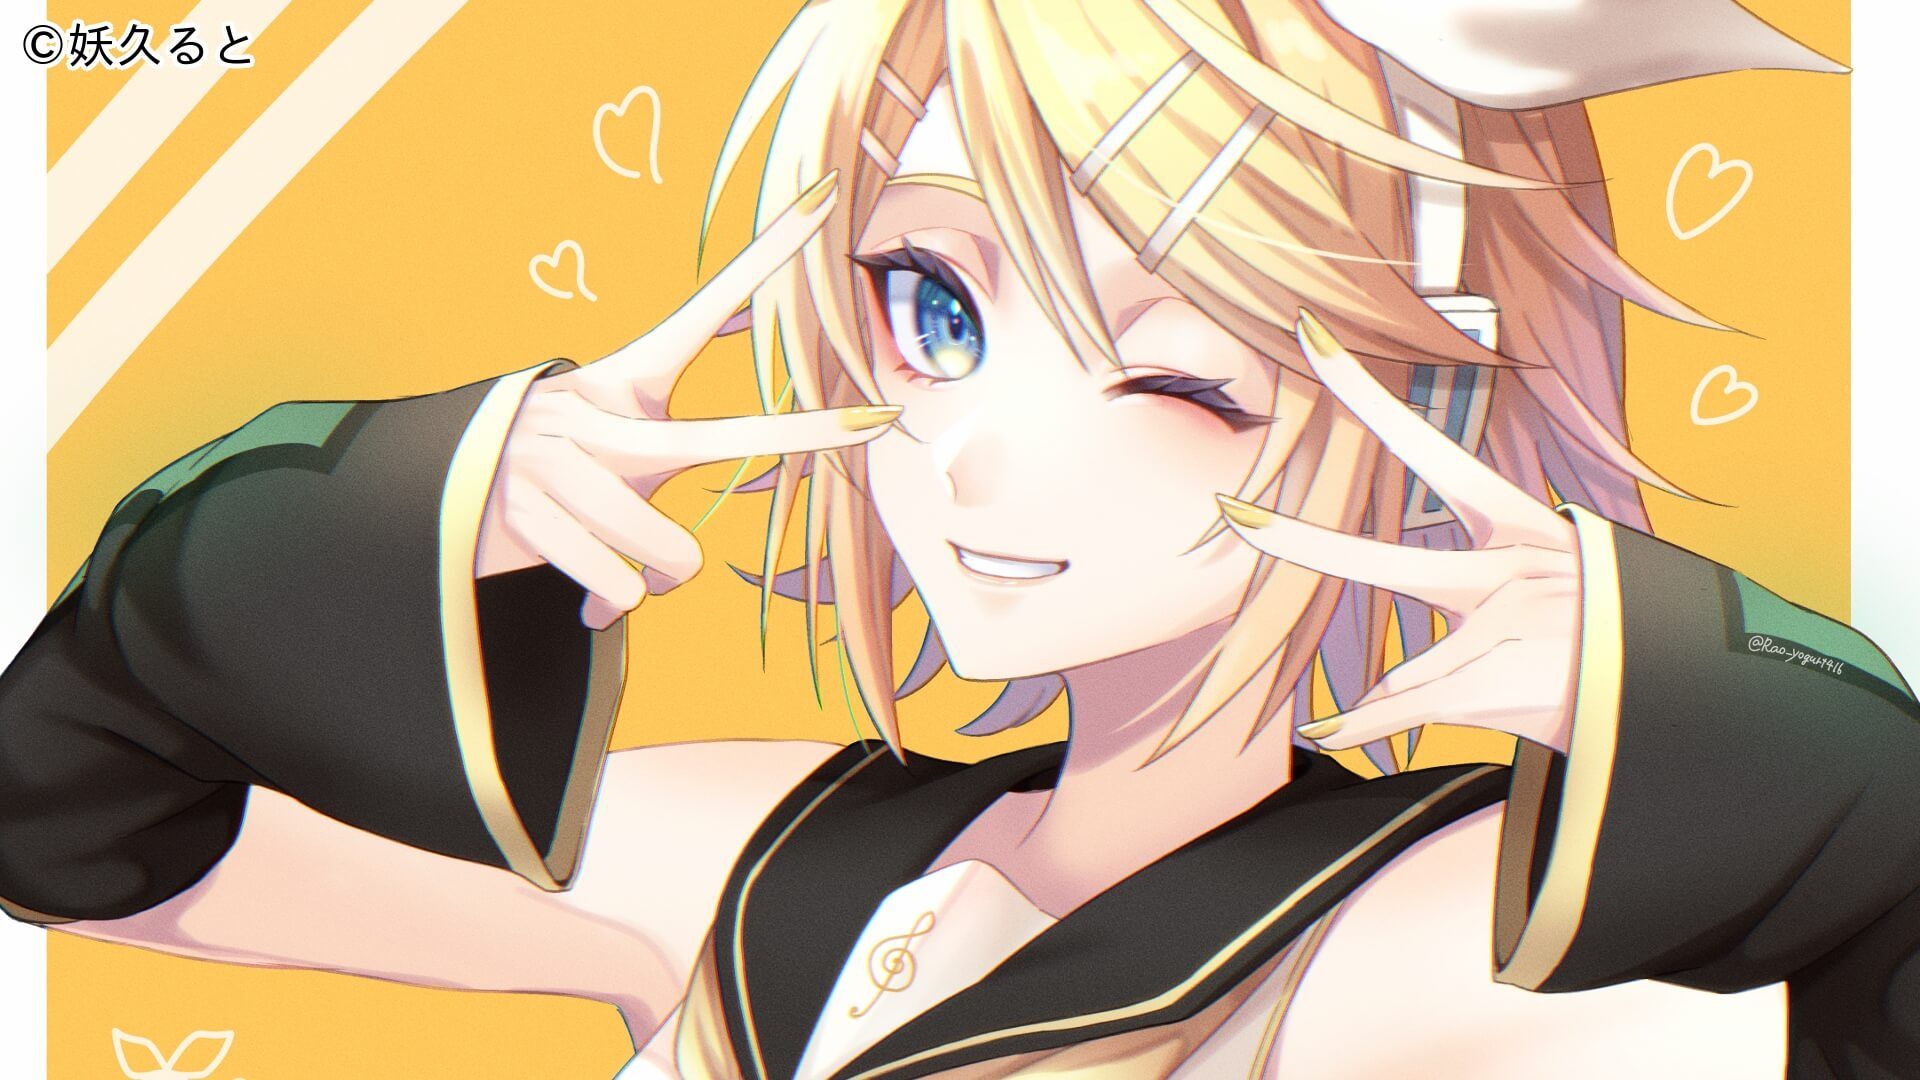 Virtual Singer with Cute Voice! VOCALOID Kagamine Rin Fanart Collection!. ART street- Social Networking Site for Posting Illustrations and Manga